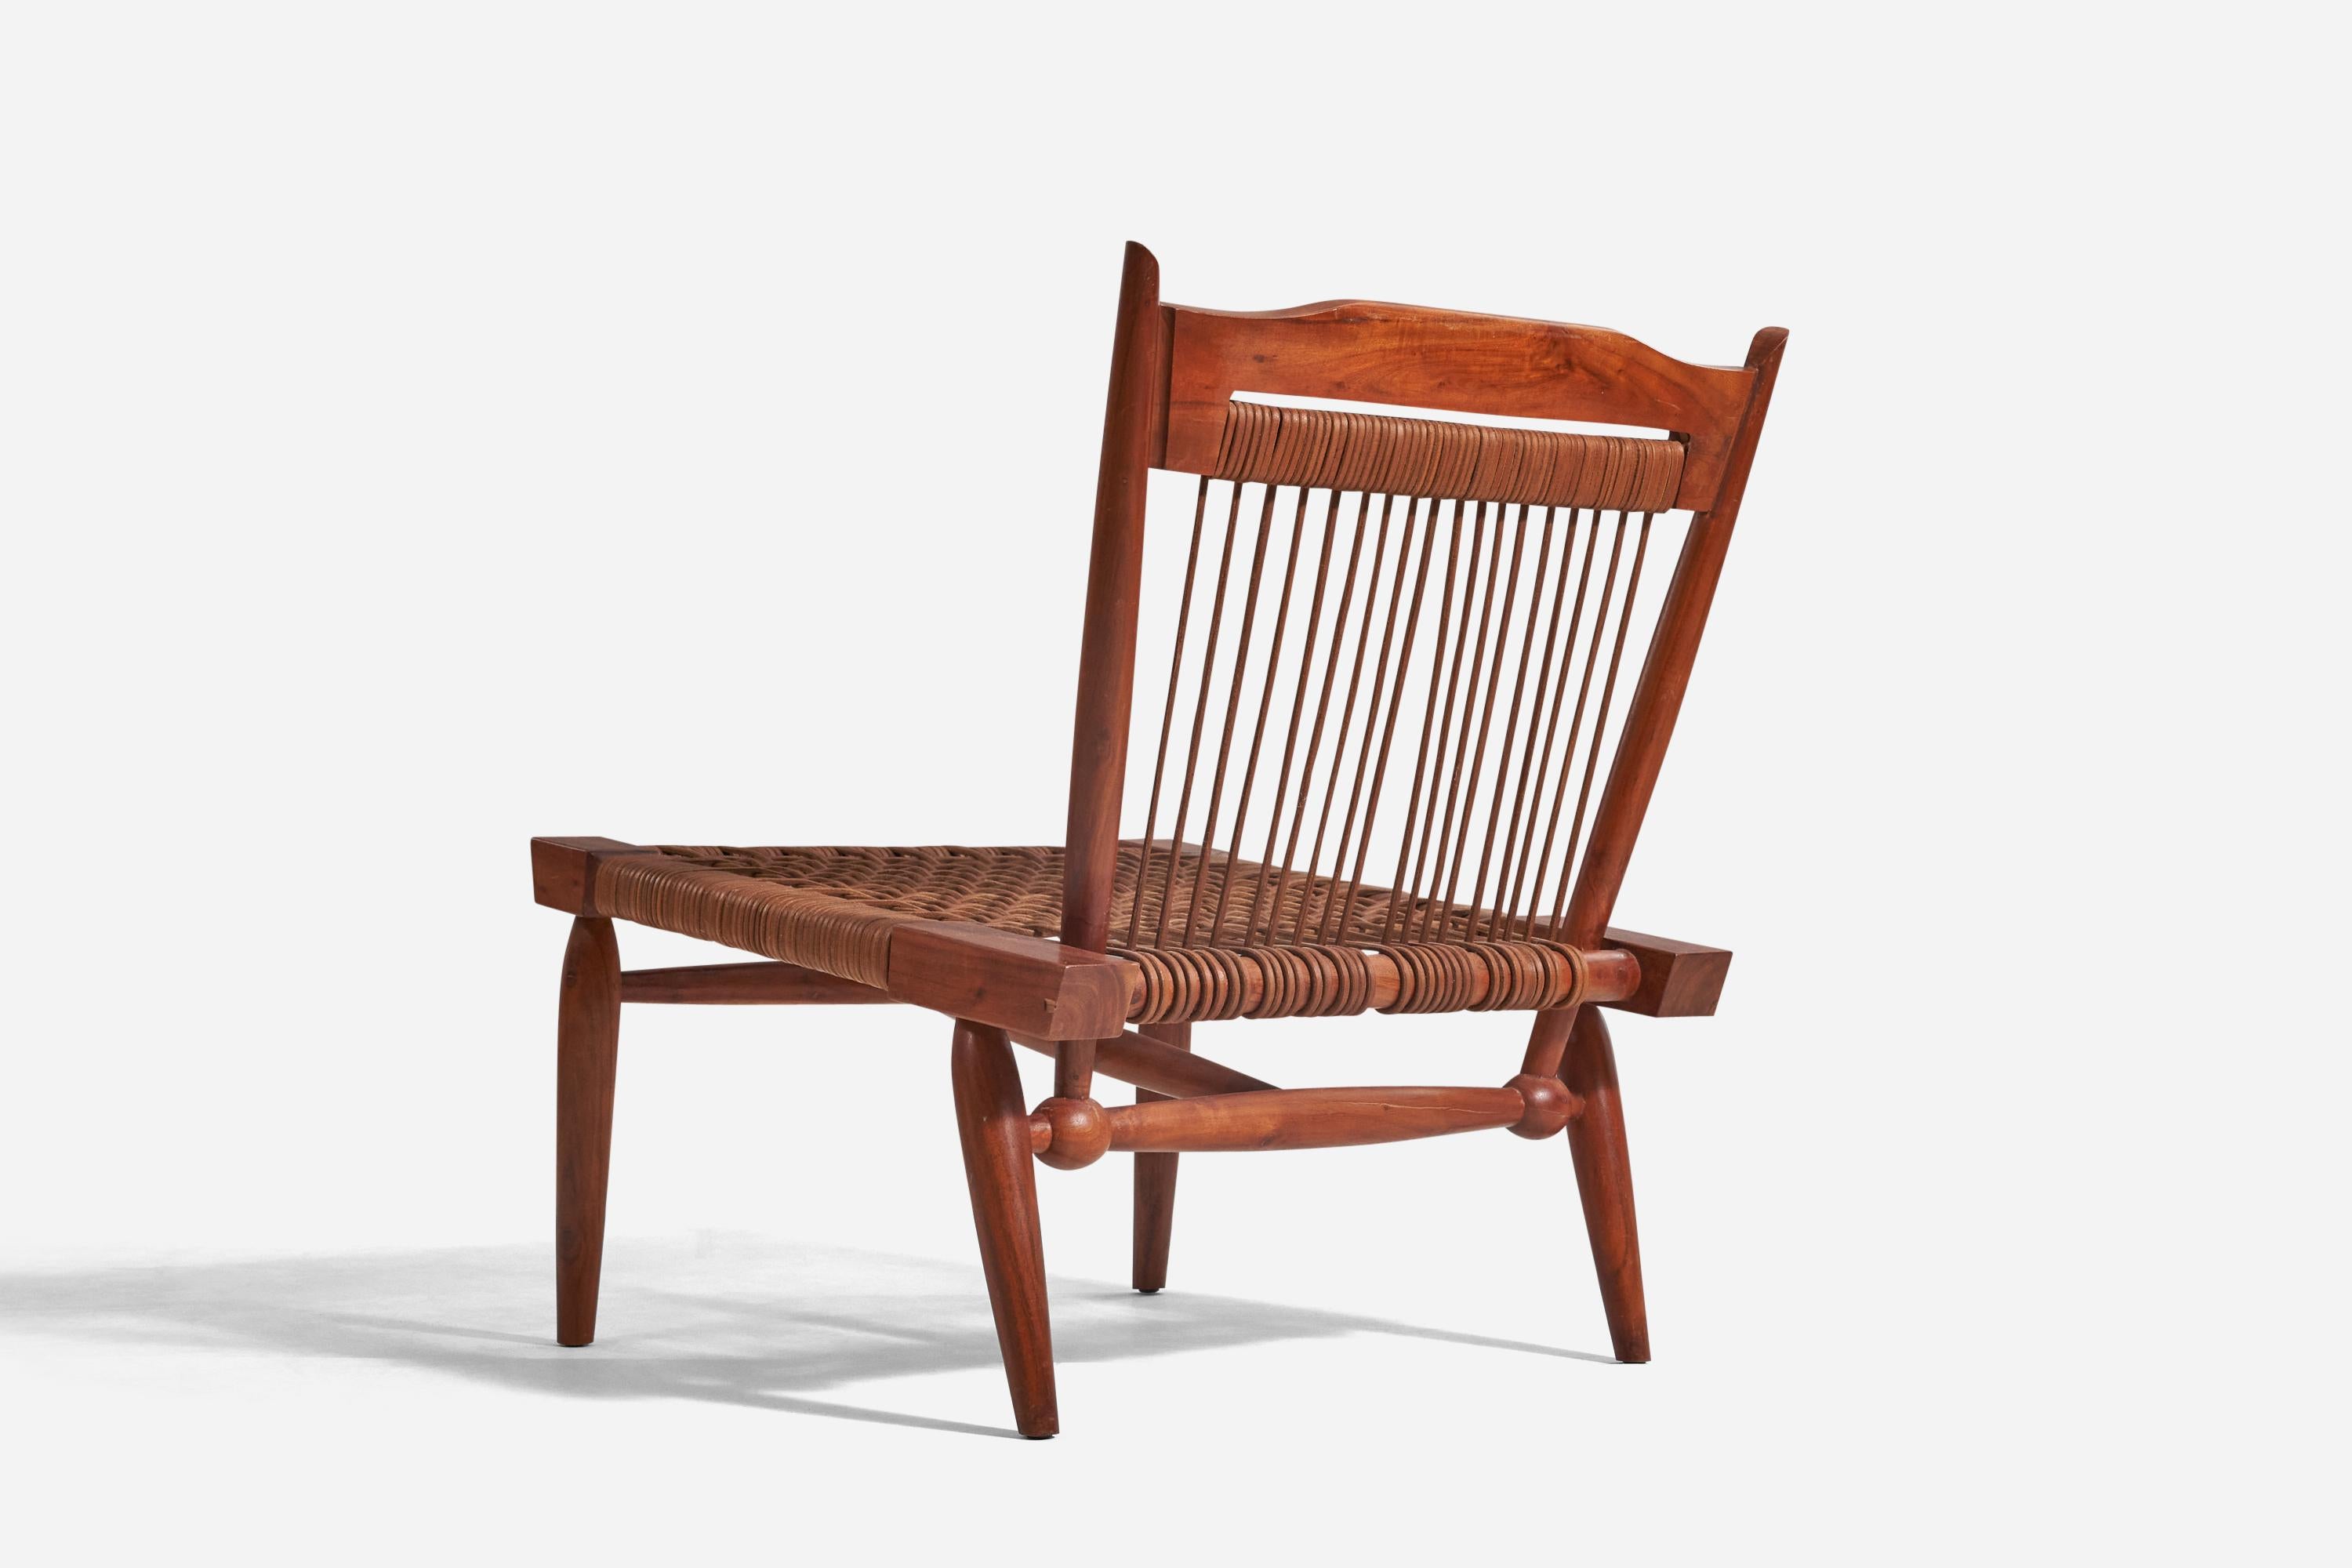 American Designer, Lounge Chair, Walnut, Cane, United States, 1960s In Good Condition For Sale In High Point, NC